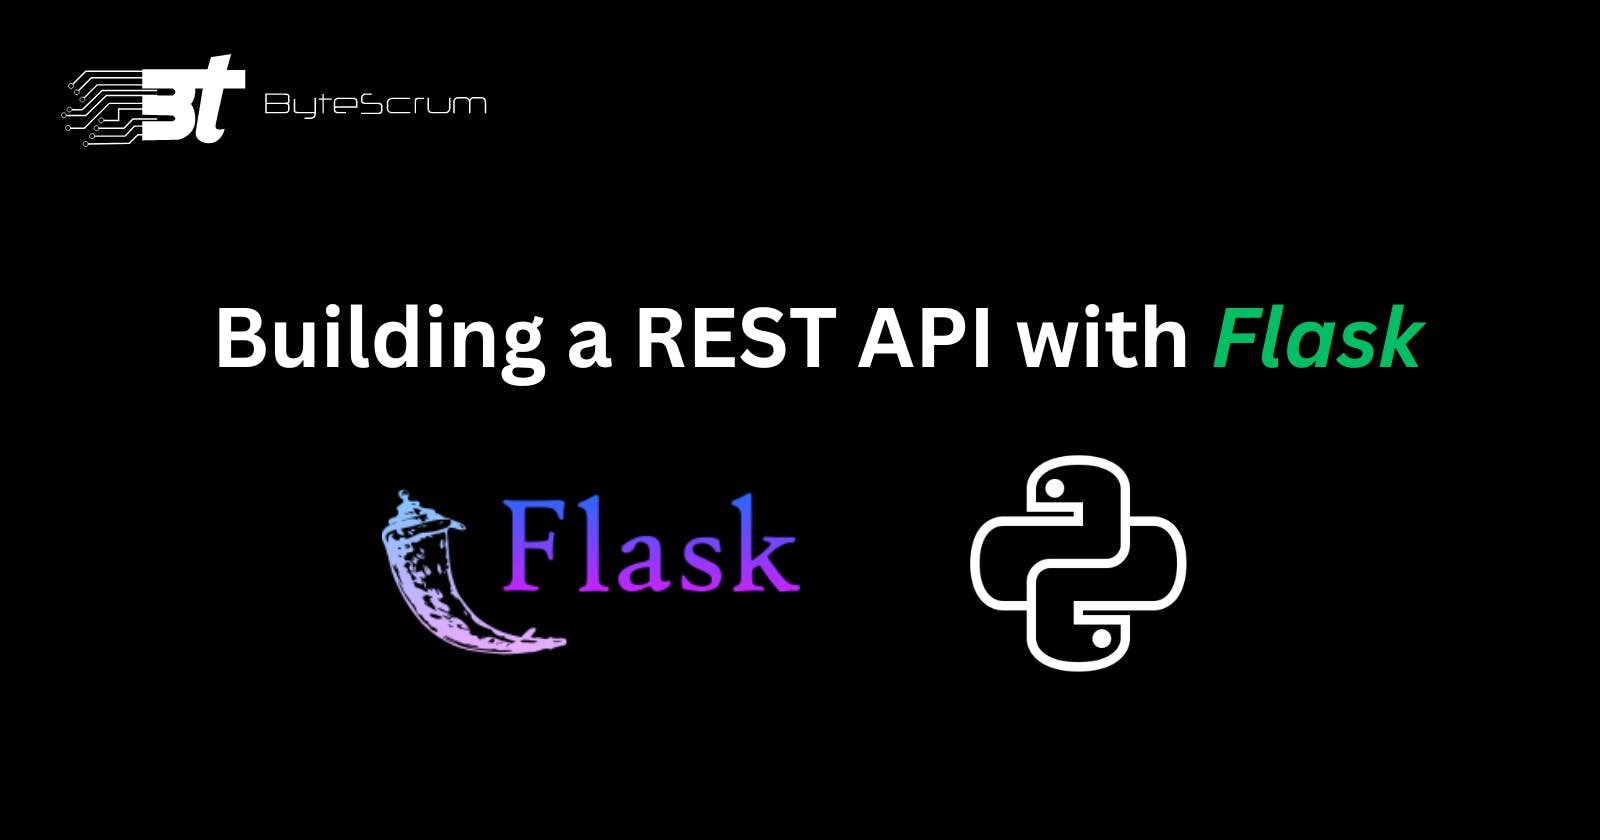 Building a REST API with Flask: A Step-by-Step Guide